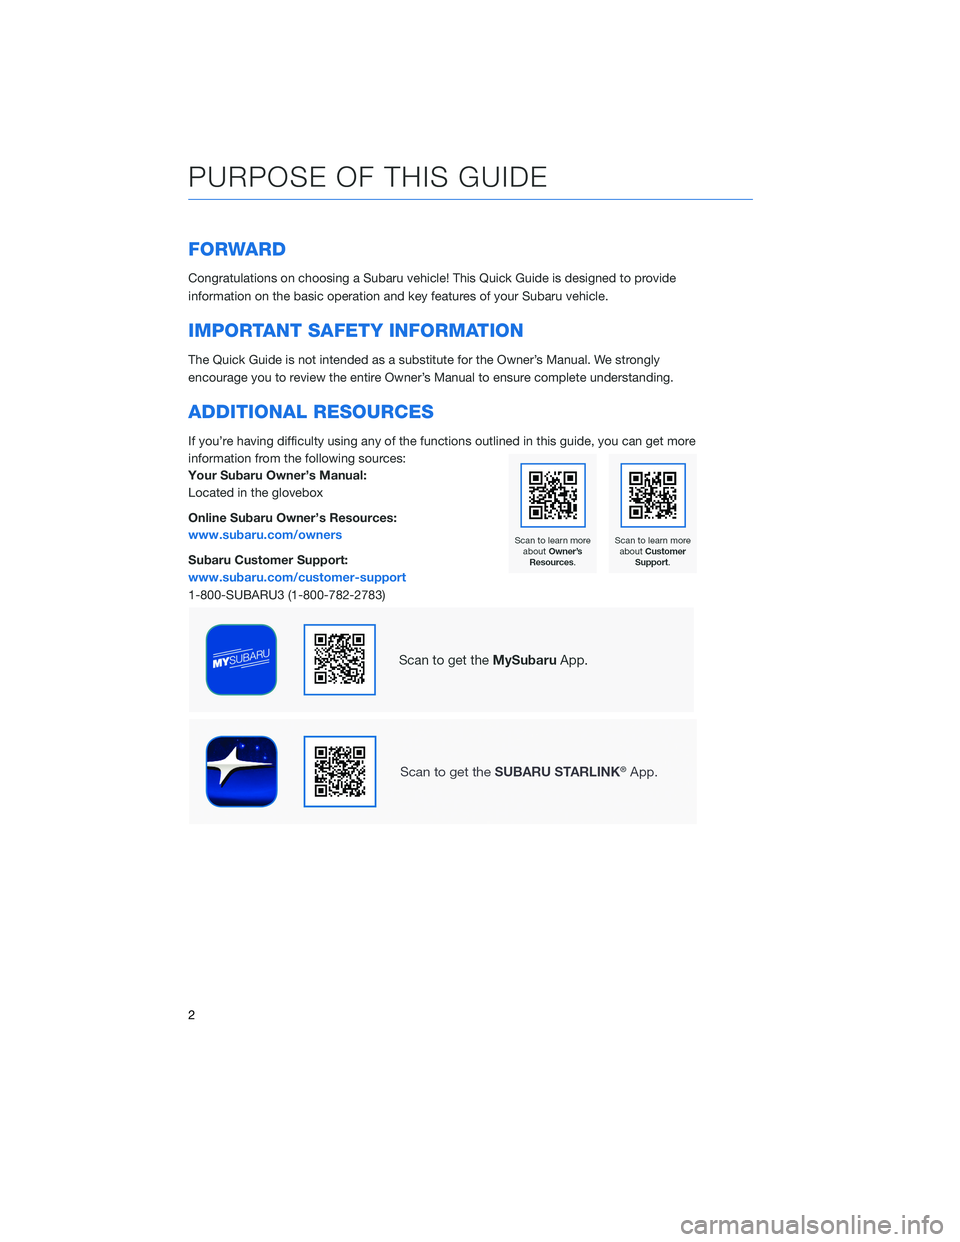 SUBARU ASCENT 2020  Quick Guide FORWARD
Congratulations on choosing a Subaru vehicle! This Quick Guide is designed to provide
information on the basic operation and key features of your Subaru vehicle.
IMPORTANT SAFETY INFORMATION
T